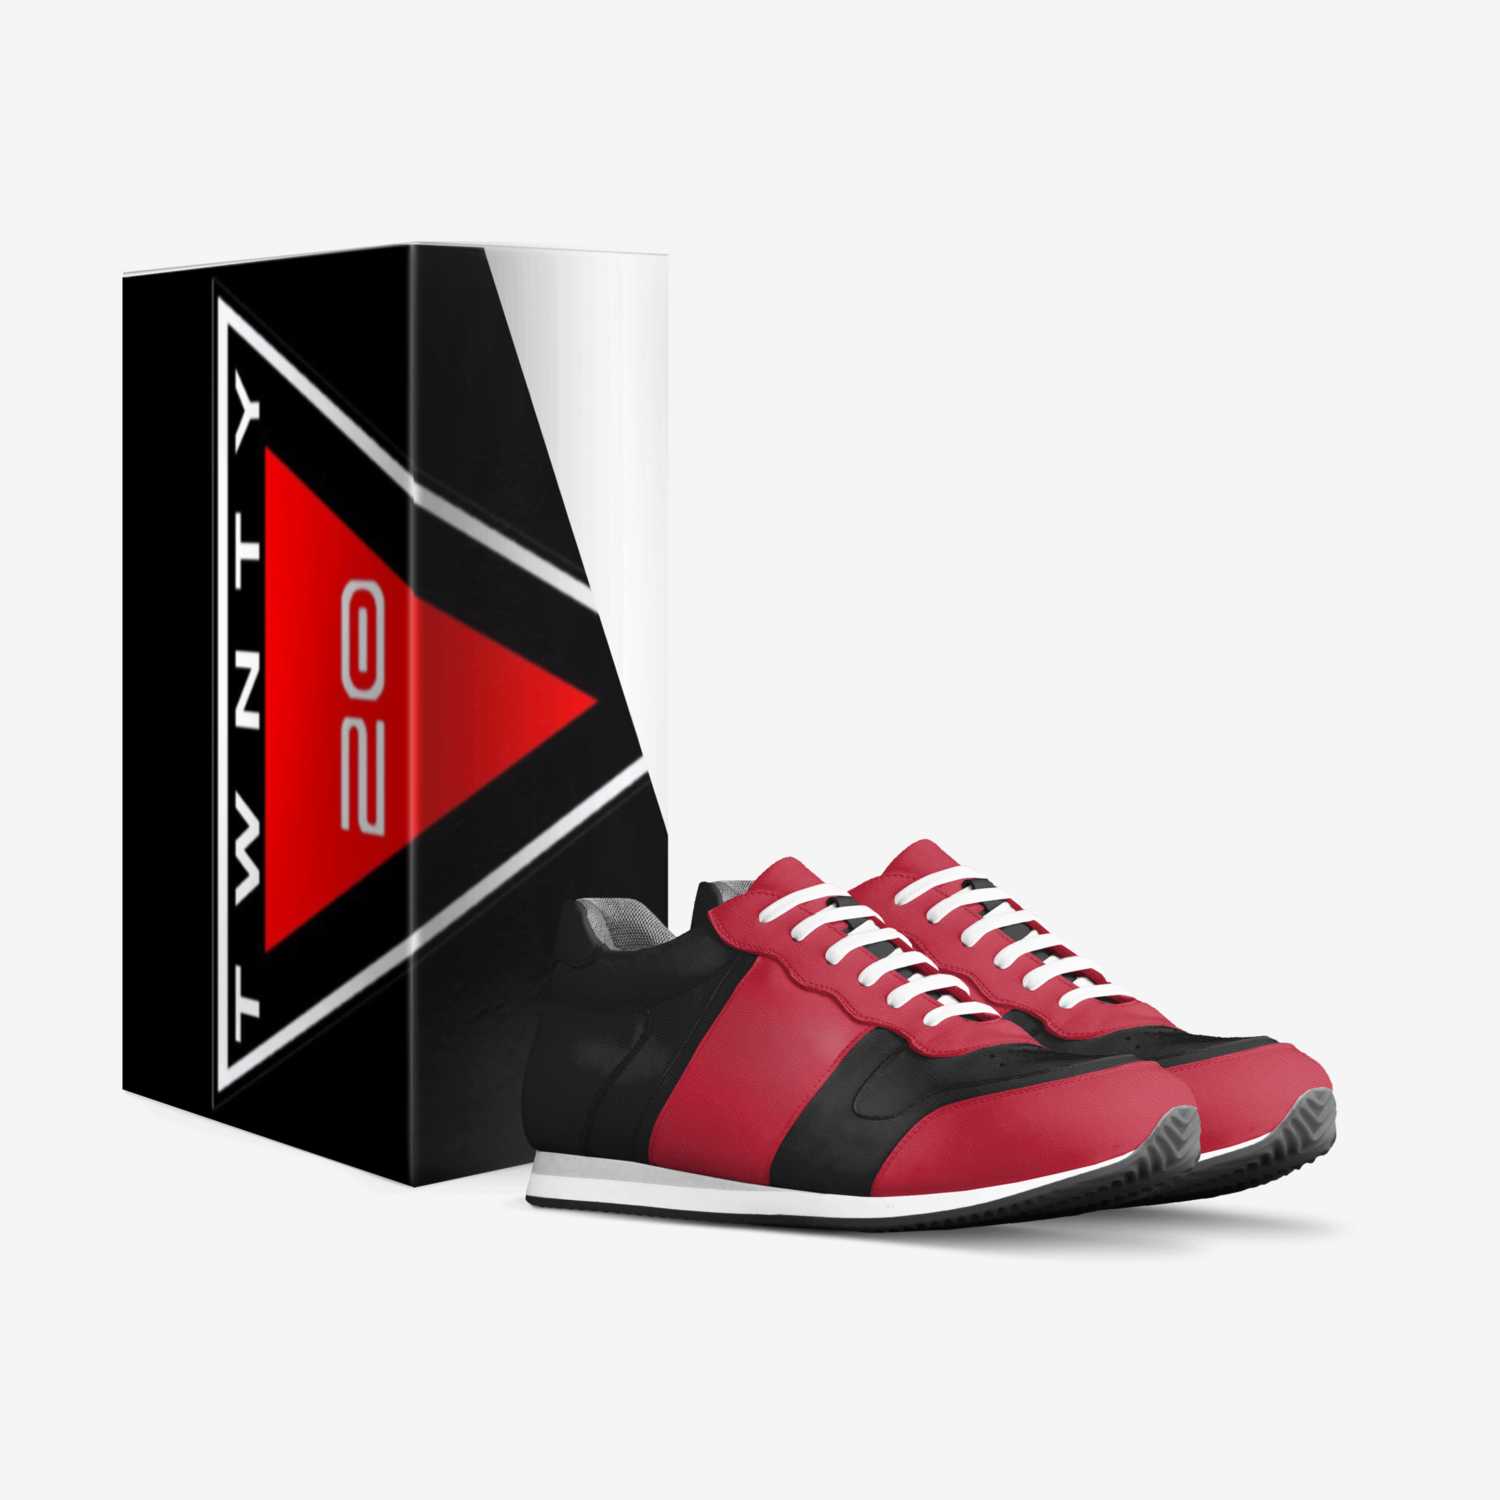 LXR  custom made in Italy shoes by Kvn Elvn | Box view